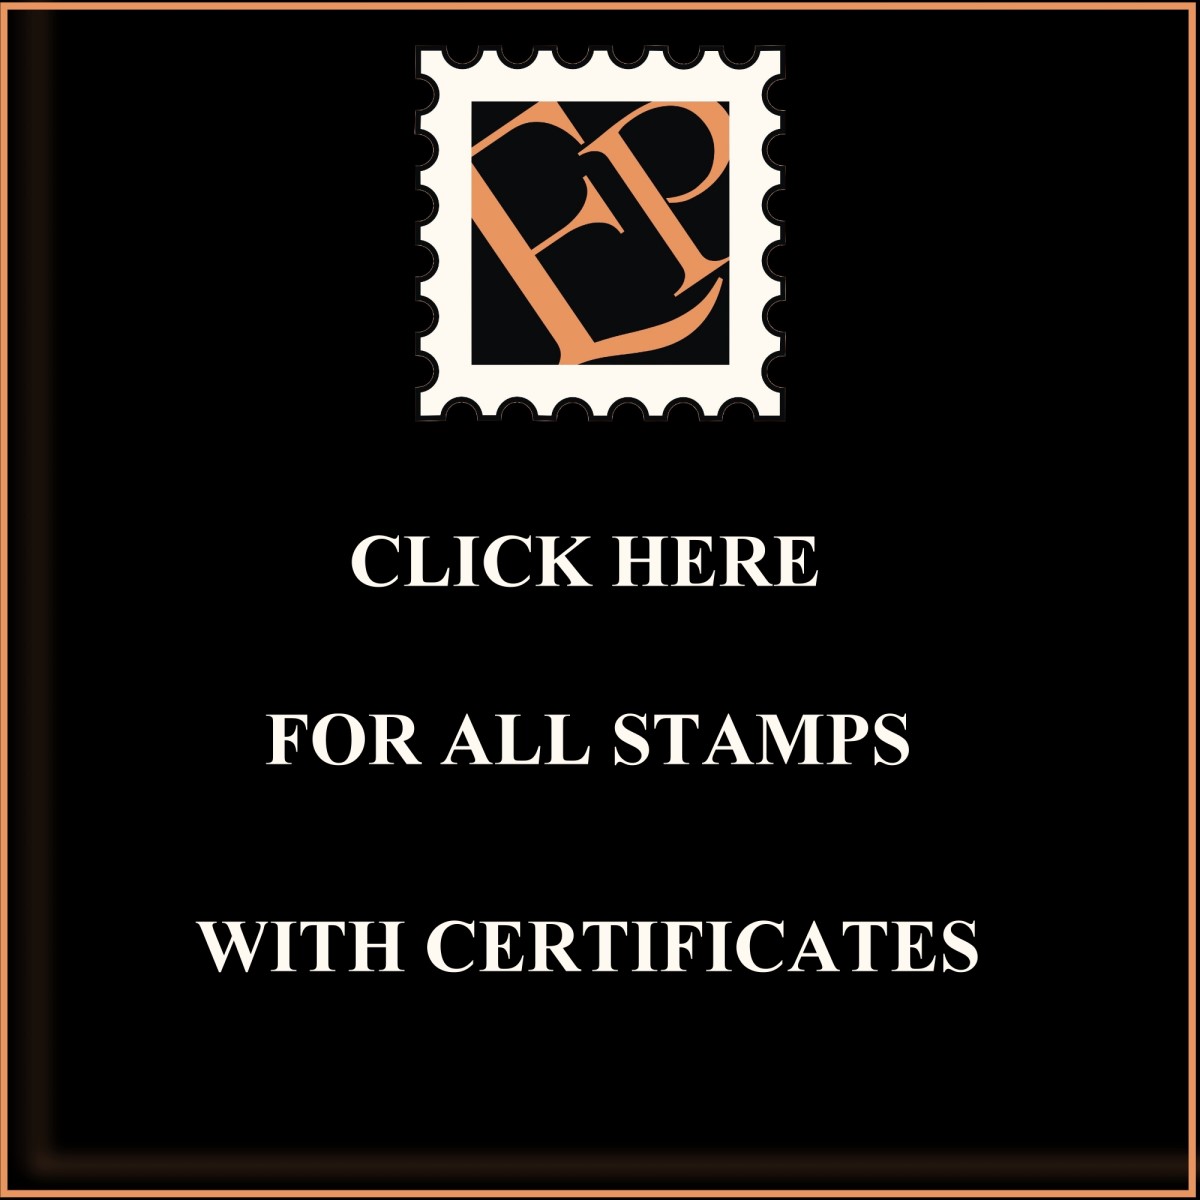 Stamps with Certificates